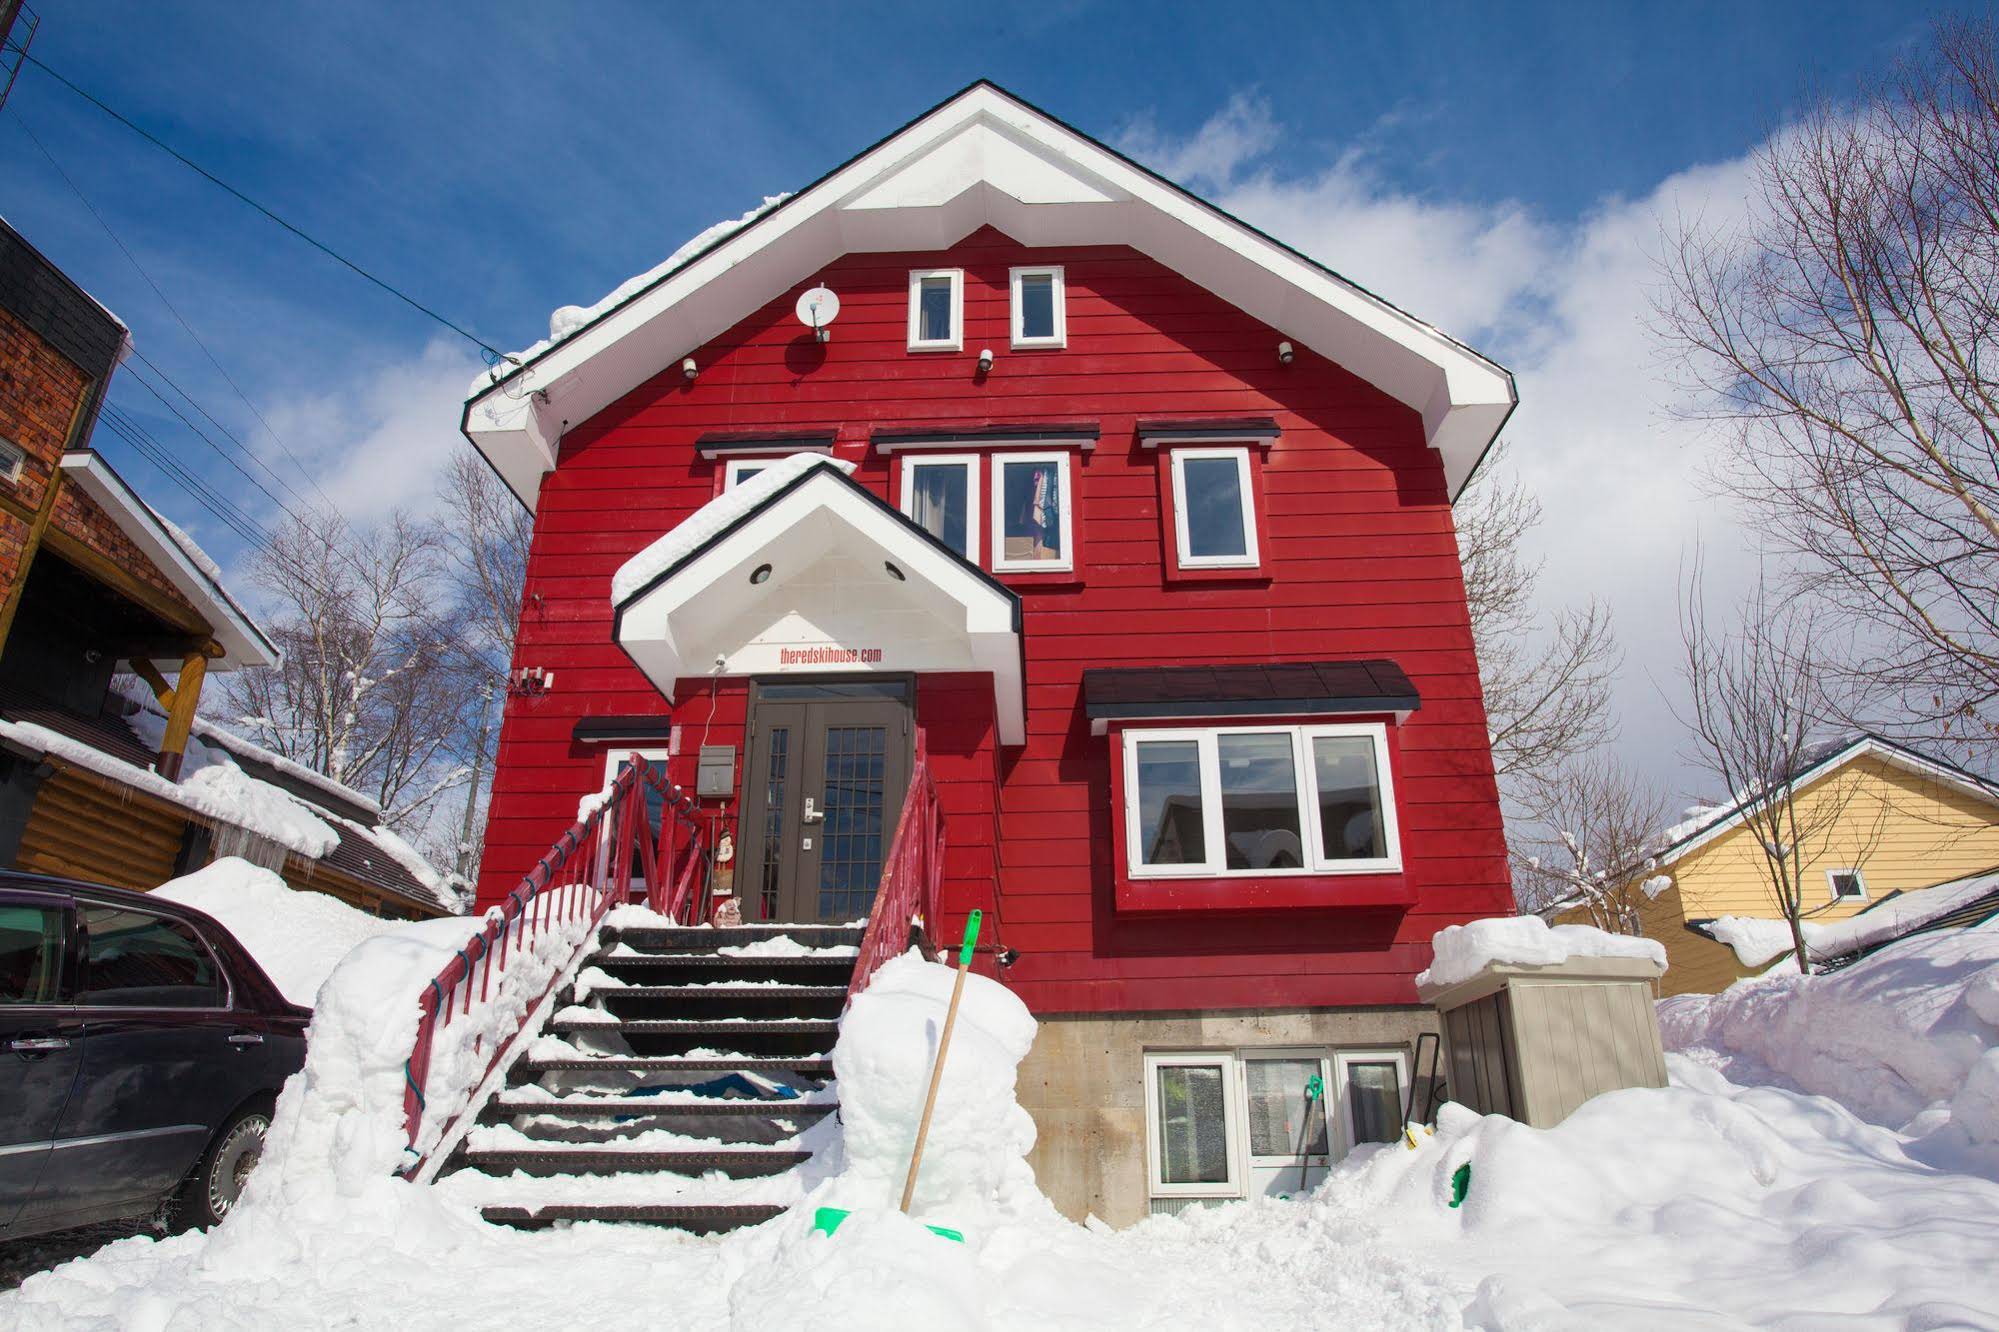 The Red Ski House